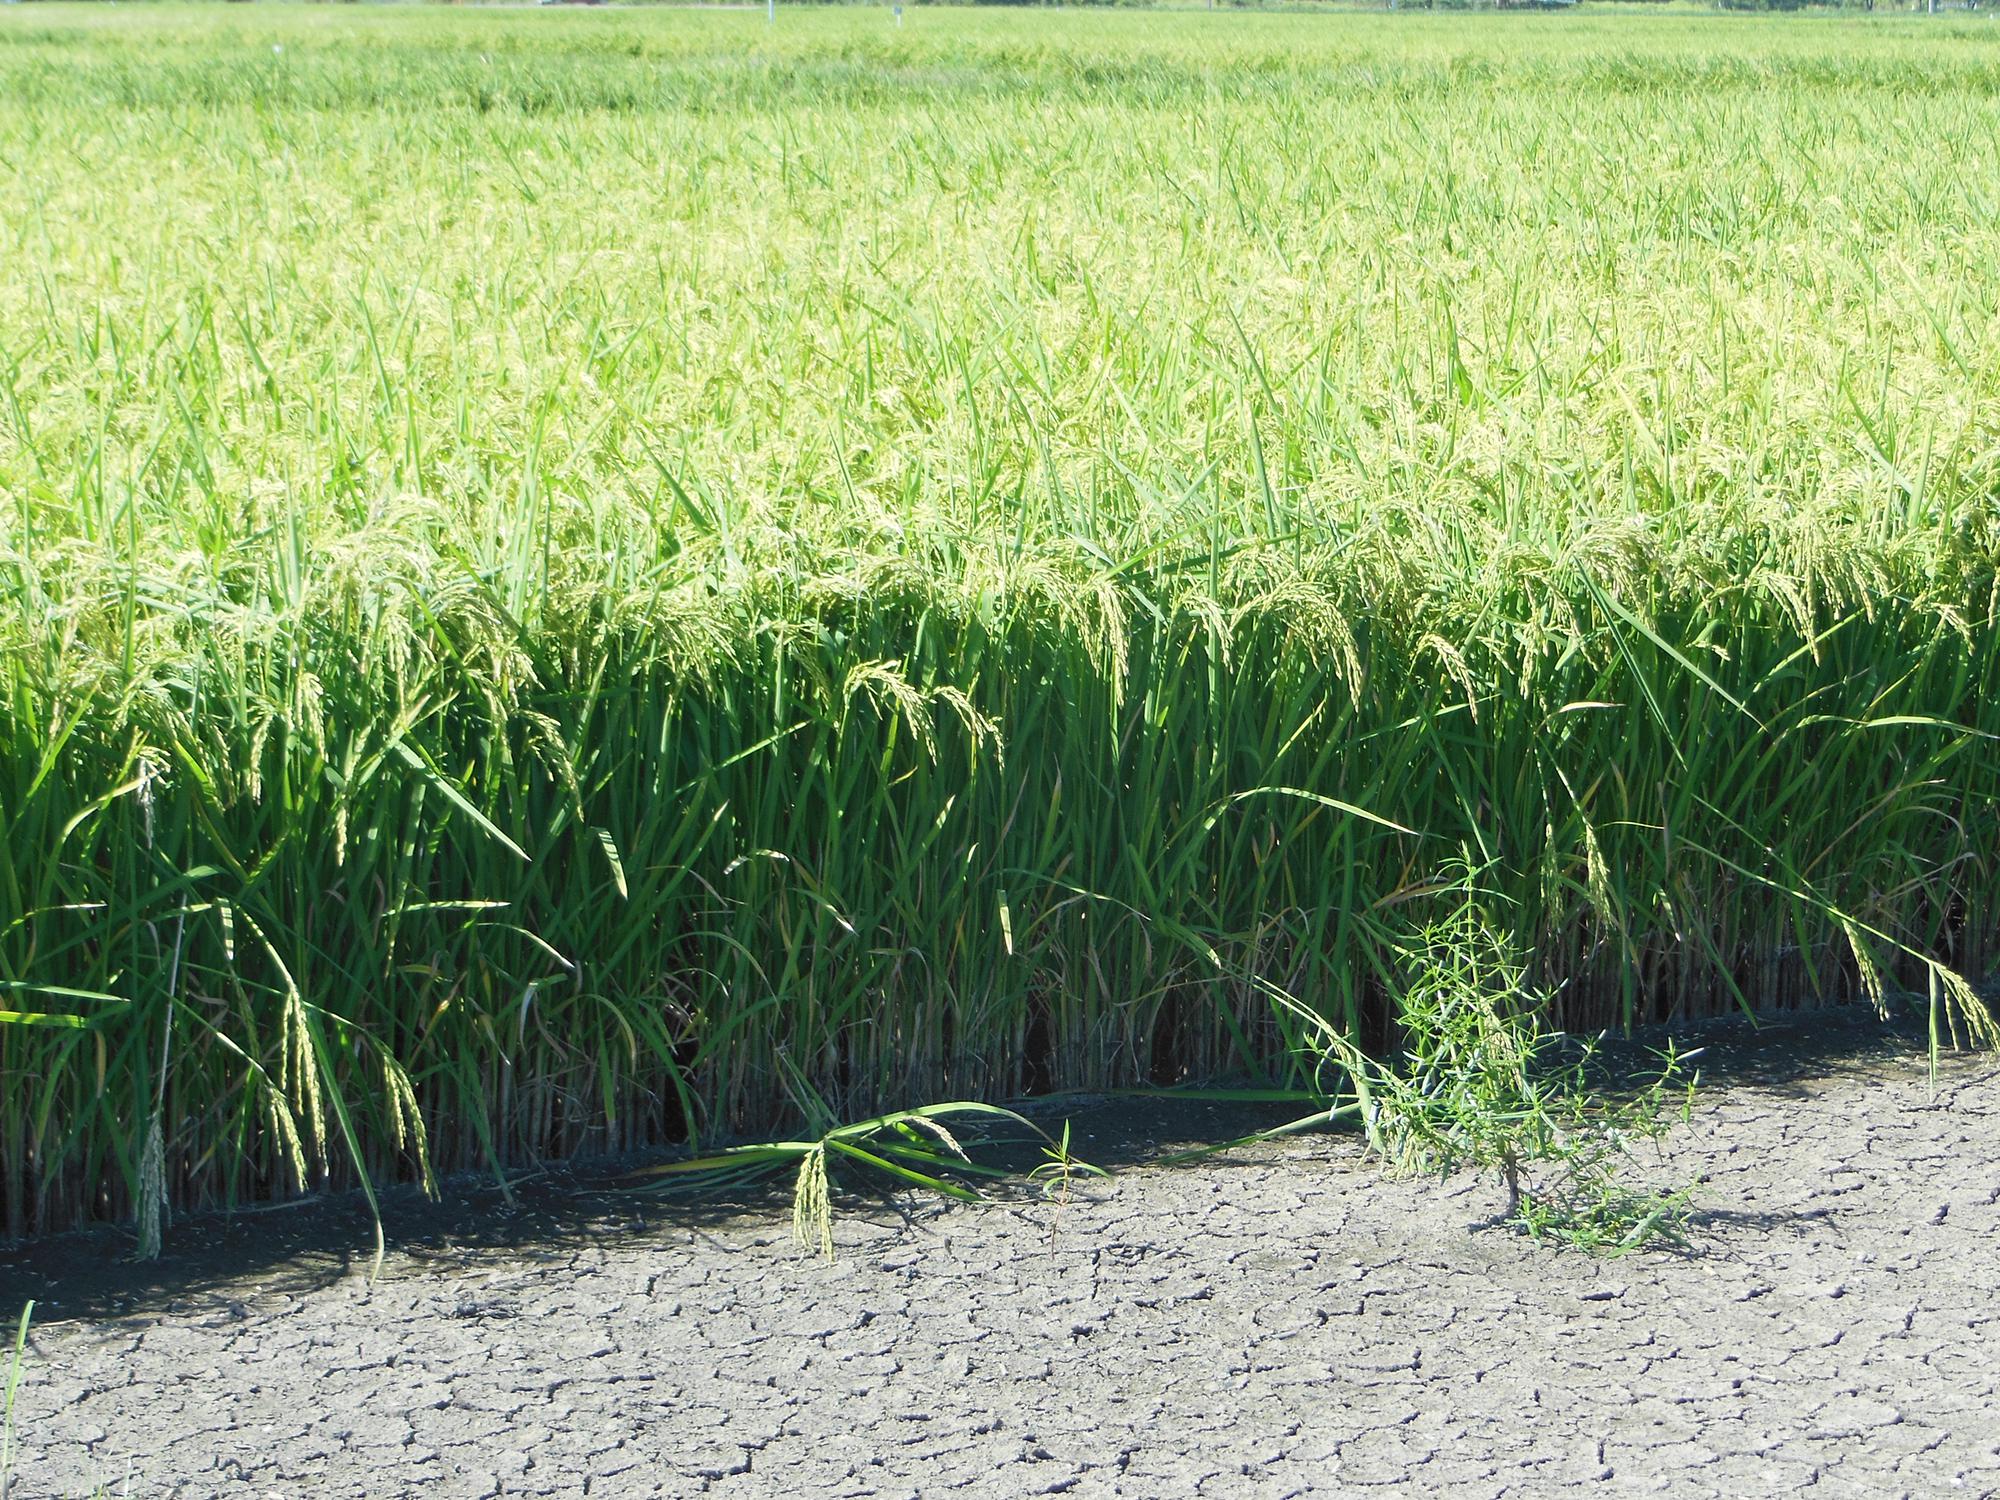 Whether grown under a conventional system or the newer alternating wet and dry method, weeds are controlled in rice during the initial 21-day continuous flood the crop needs to get established. (Photo by MSU Extension Service/Lee Atwill)